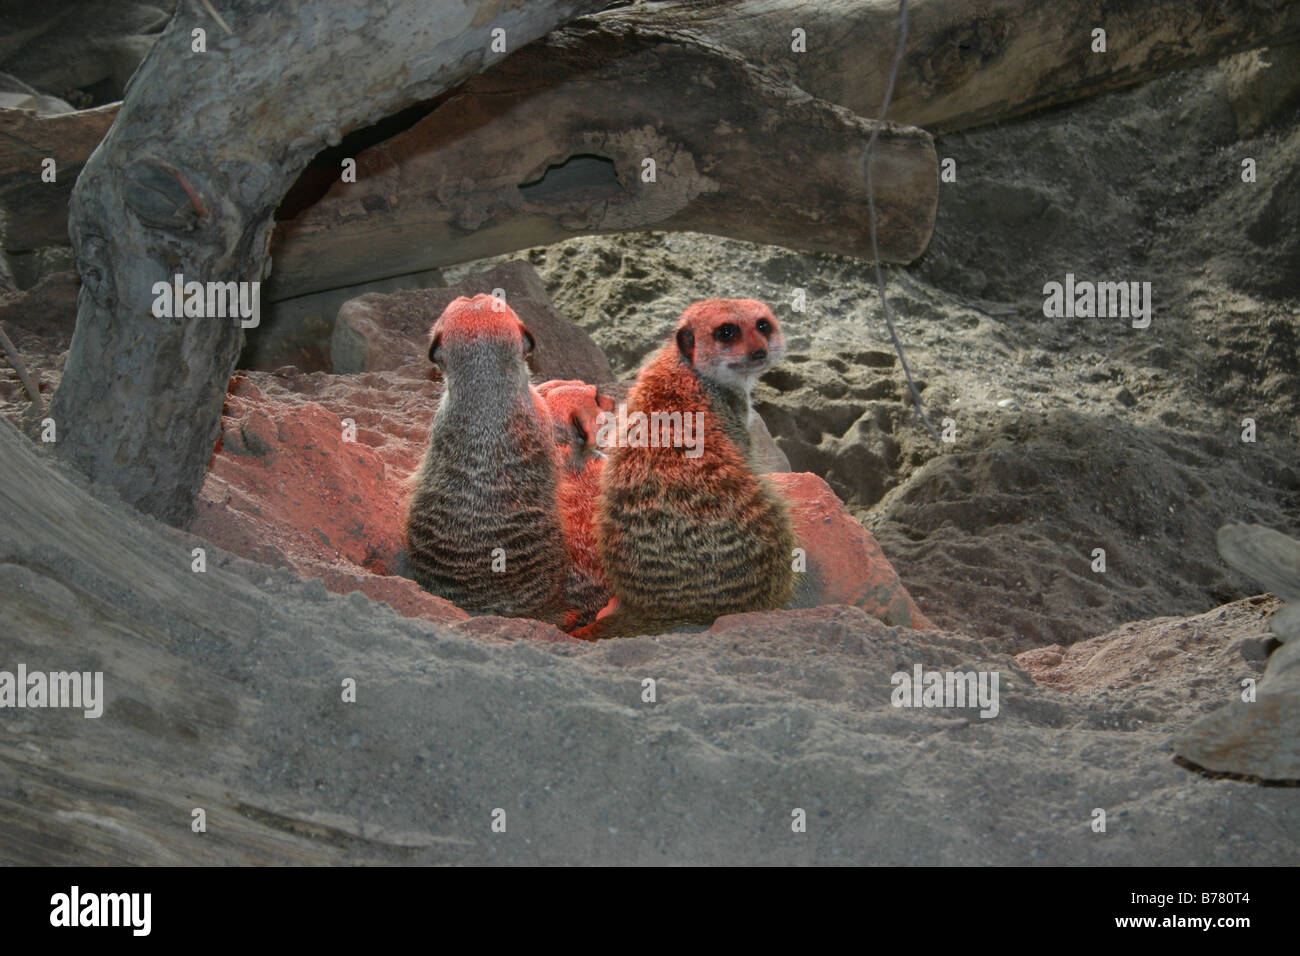 Two meerkats warm themselves beneath a hidden heat lamp in a North American zoo. Stock Photo